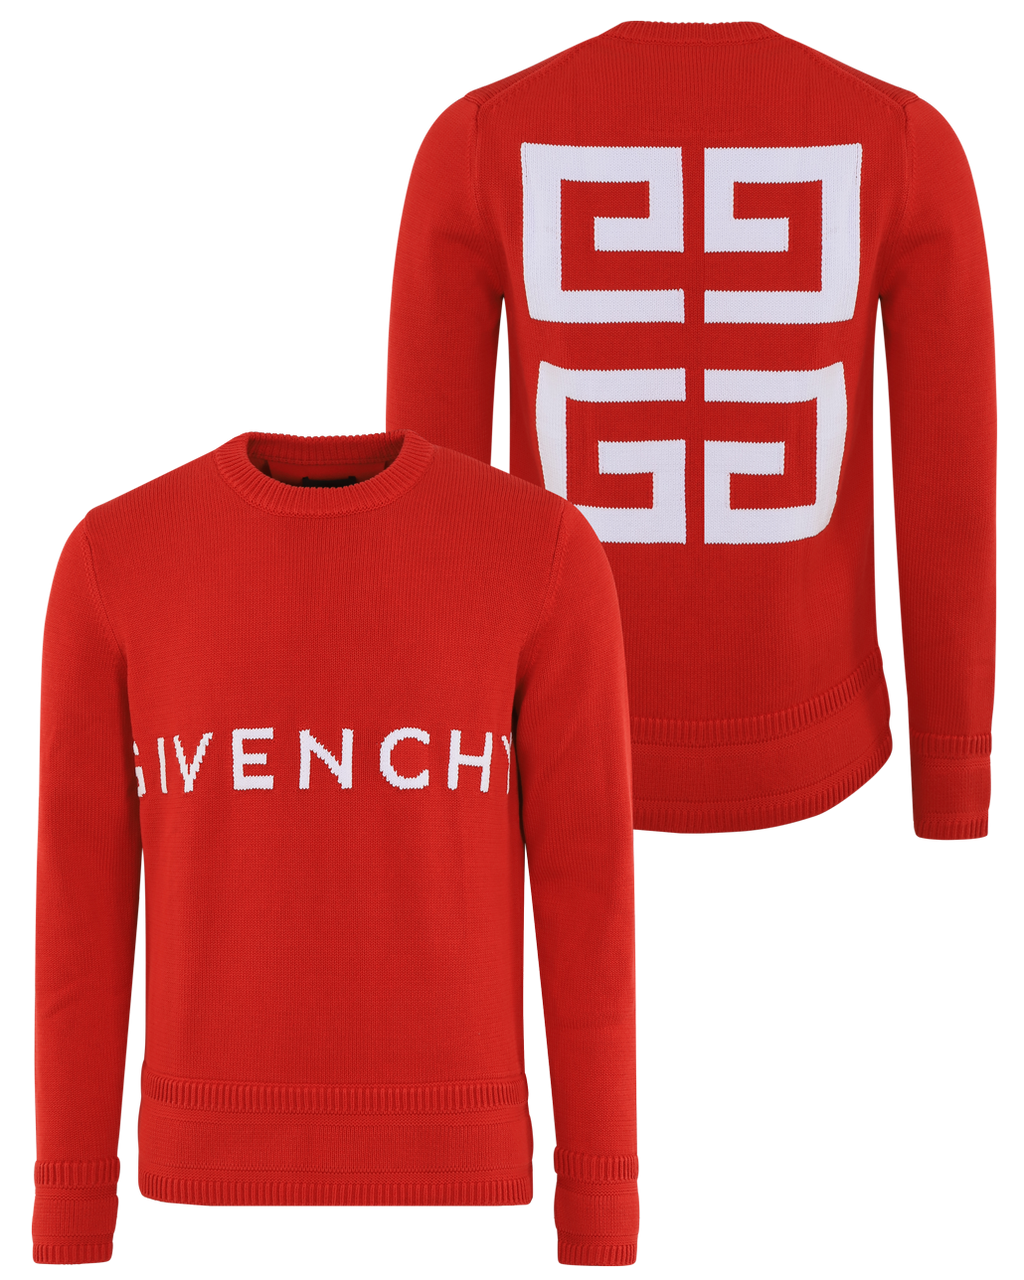 Love Lock crewneck sweater in black - Givenchy